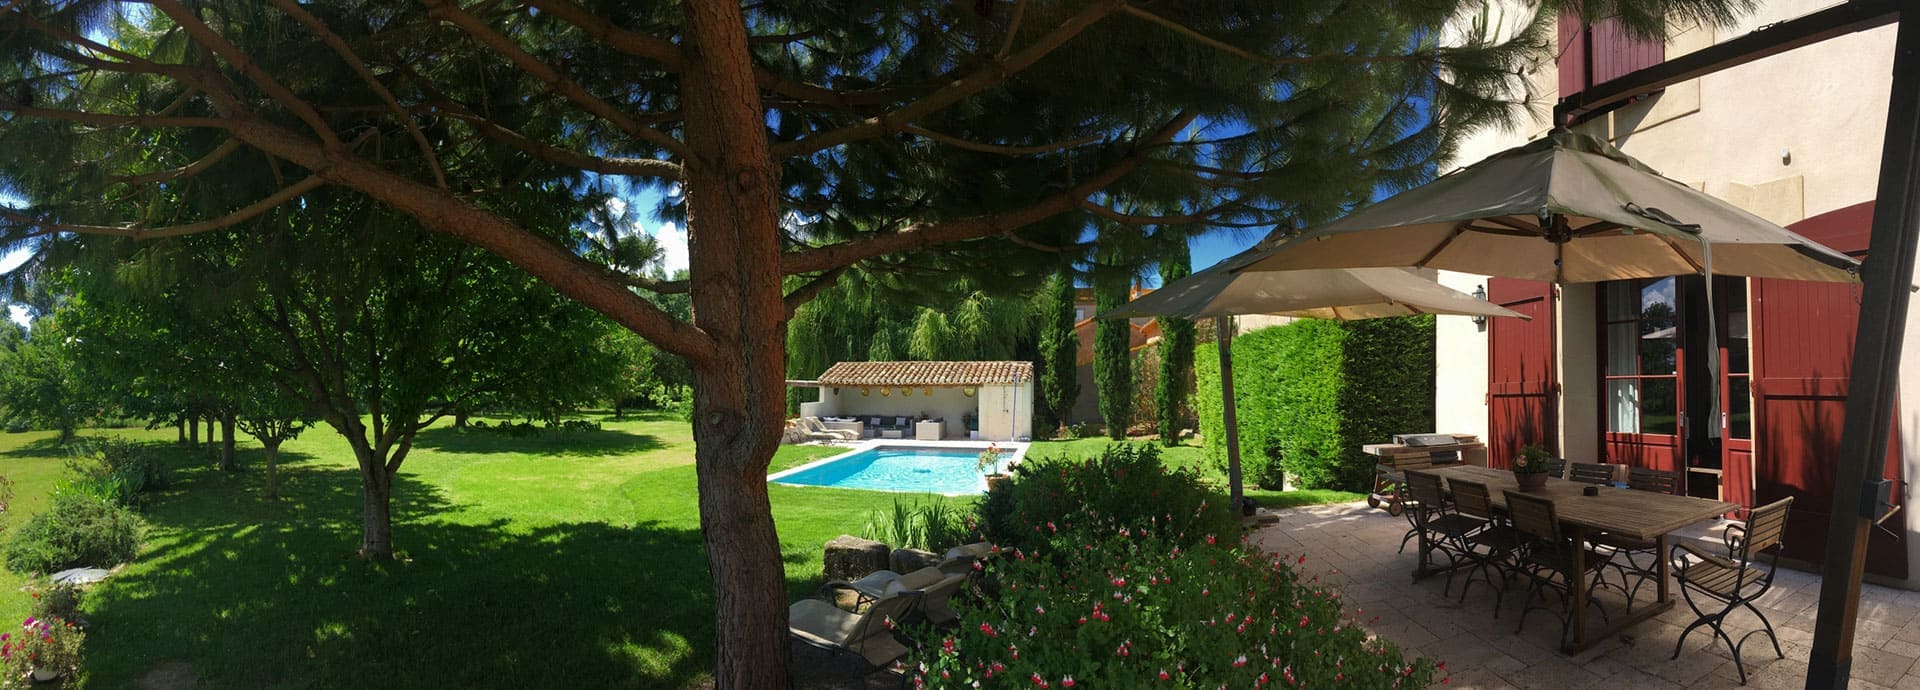 View of the terrace and swimming-pool outside Silène guesthouse in Domaine de la Vernède, holiday rental in the Hérault Department